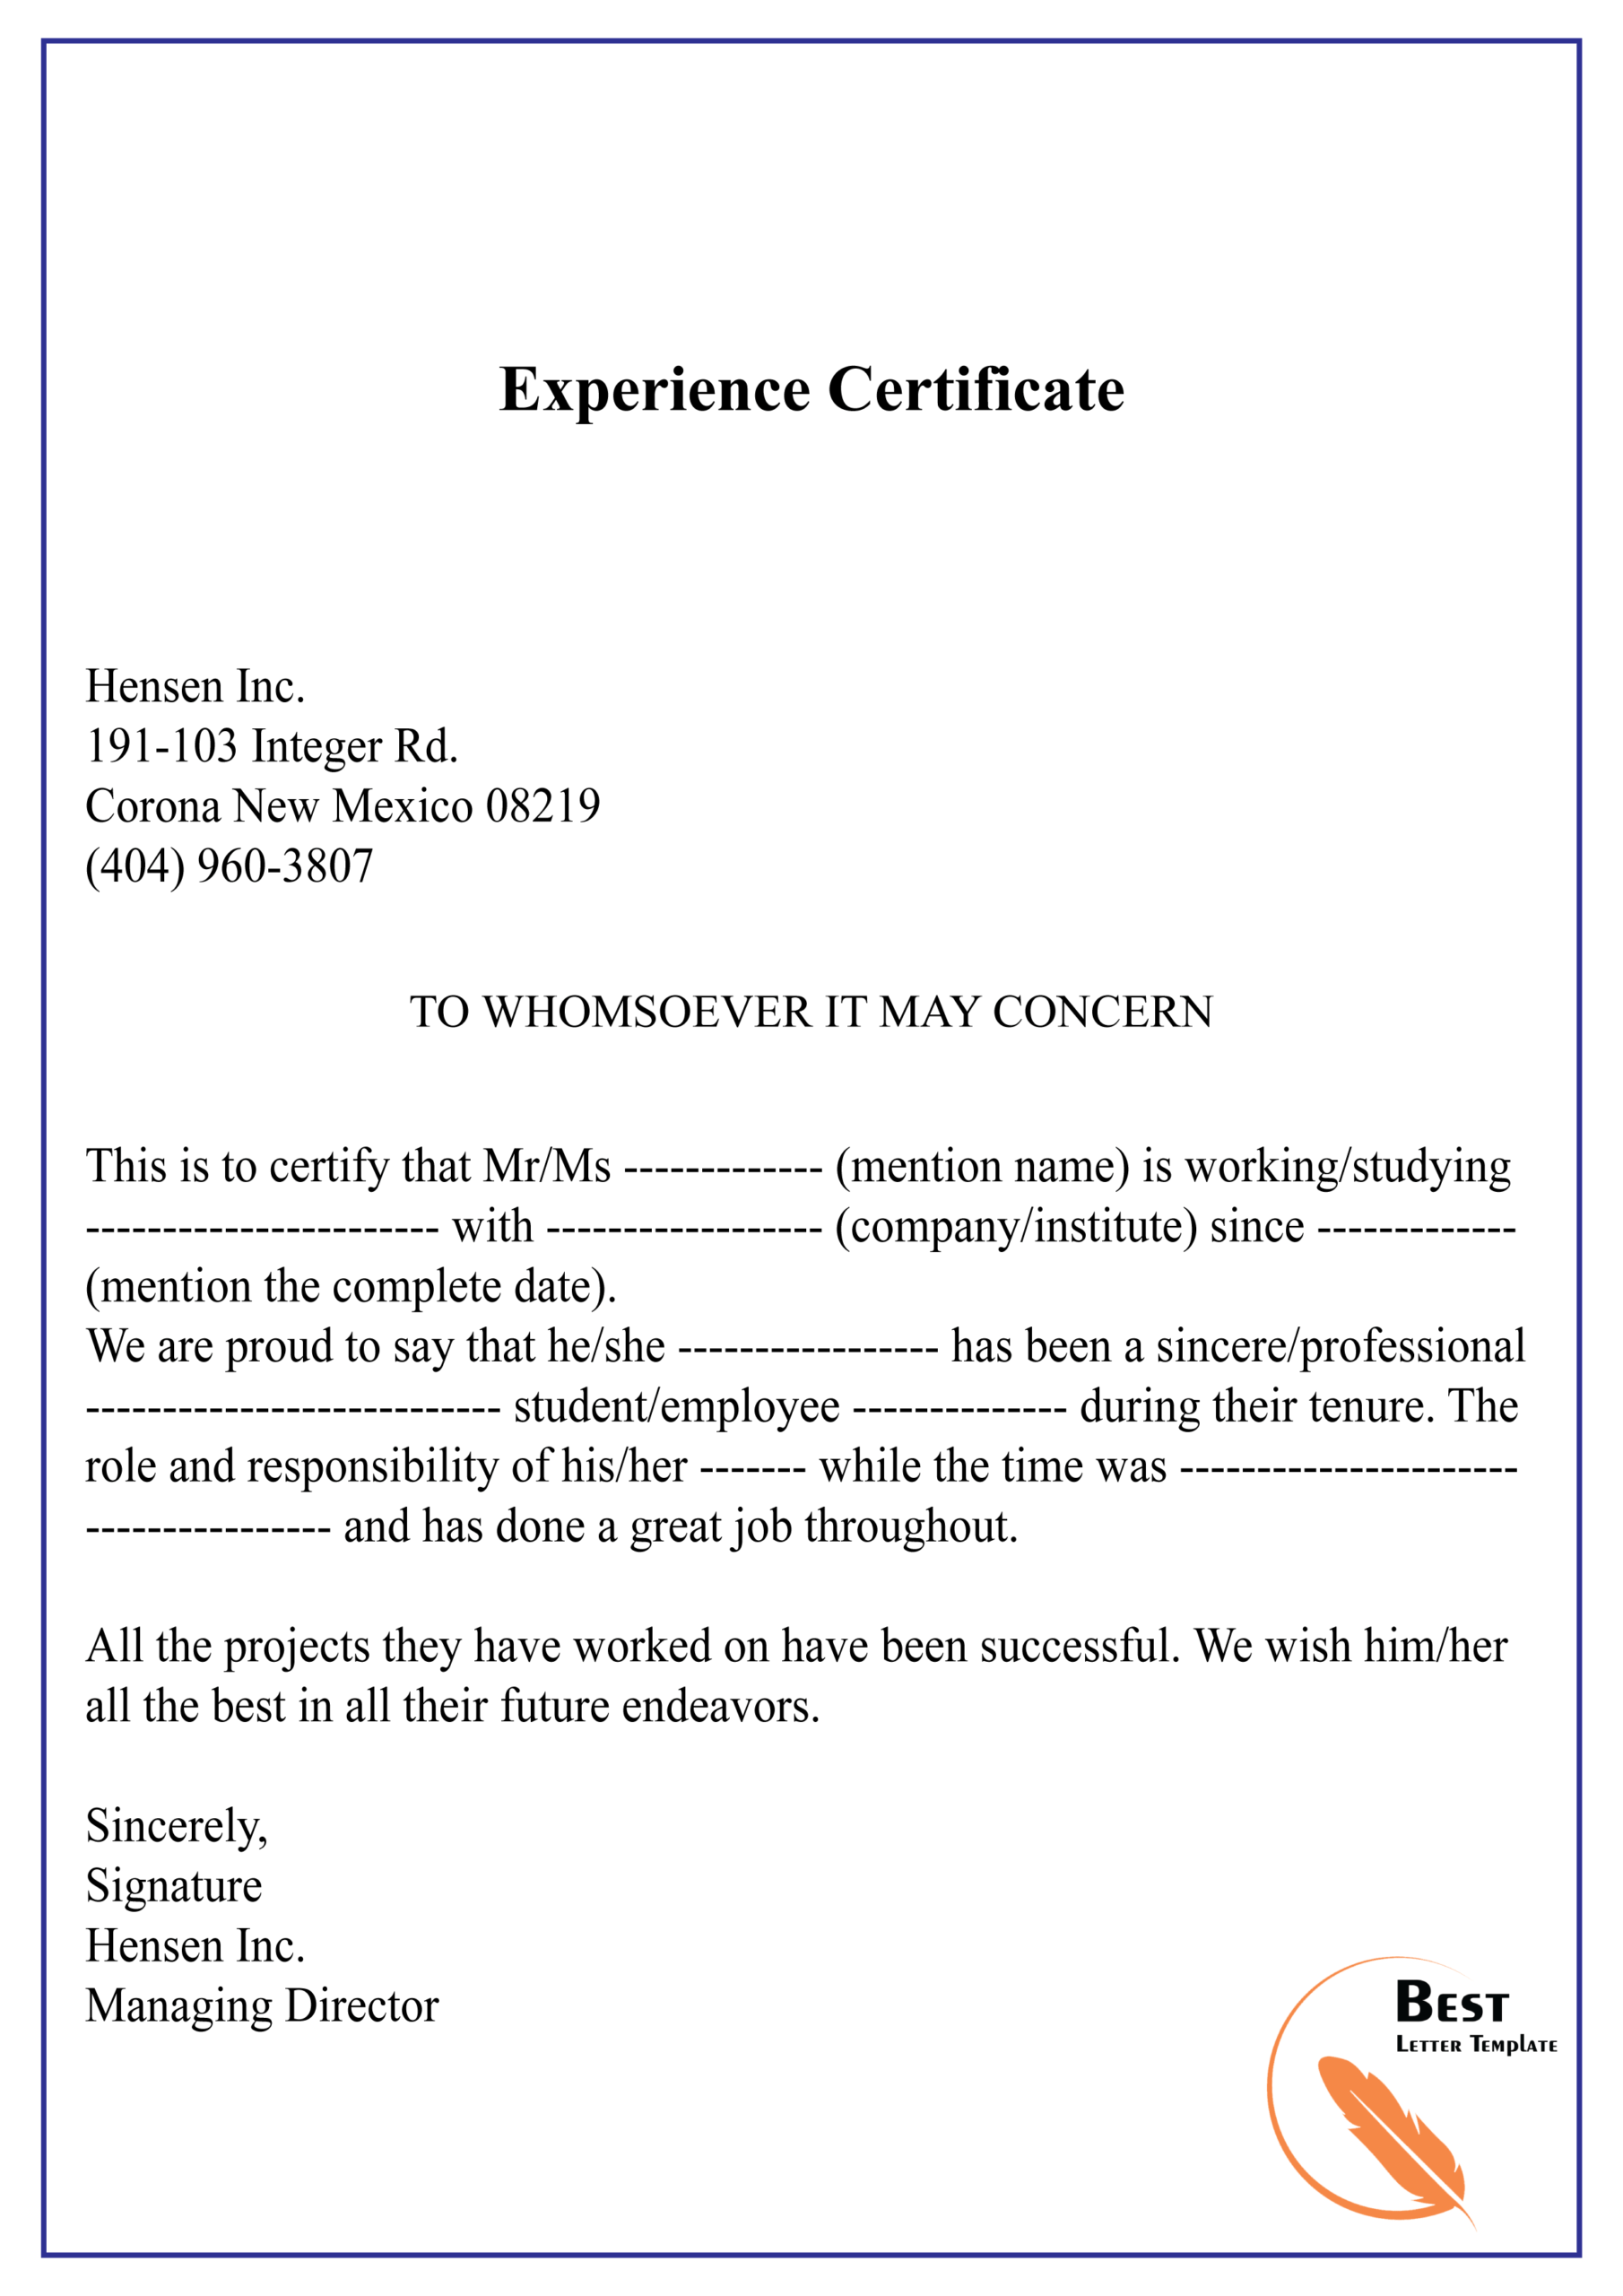 Experience Certificate 01 | Best Letter Template Inside Template Of Experience Certificate